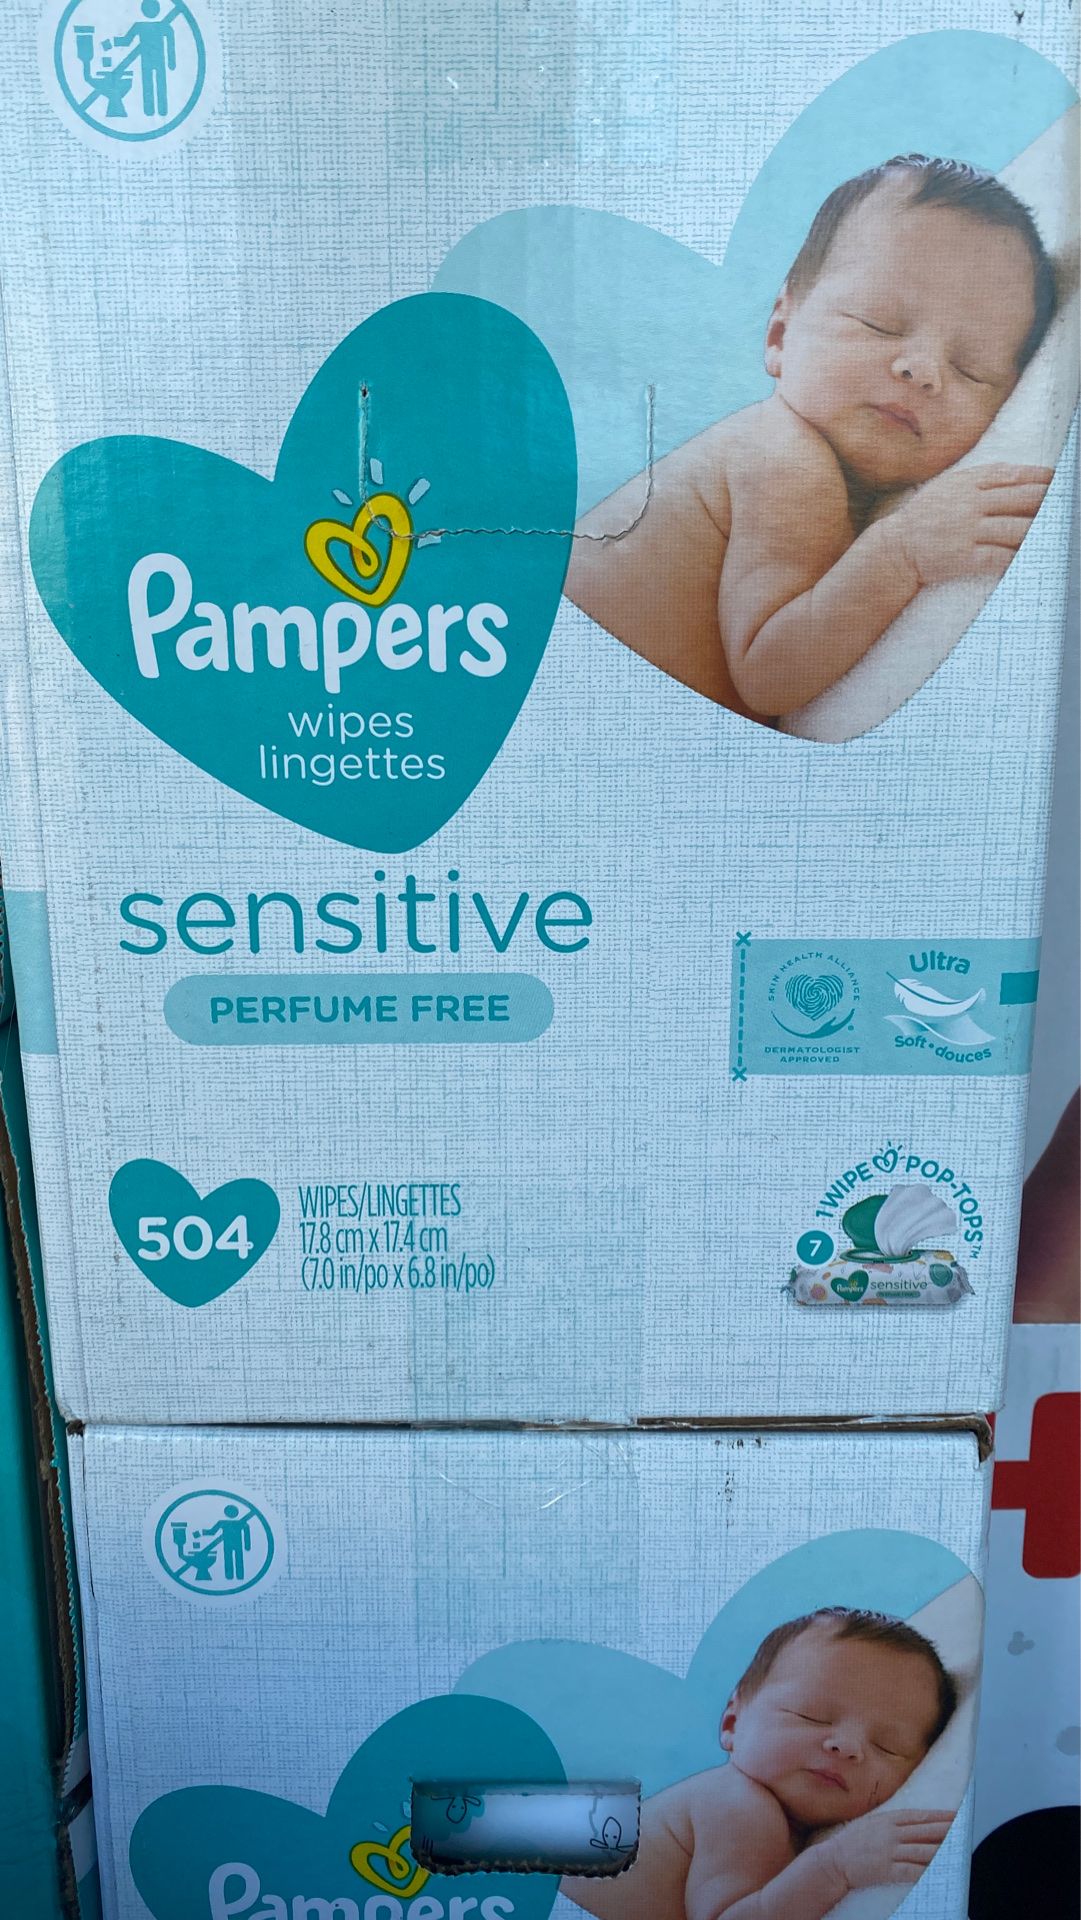 Pampers wipe